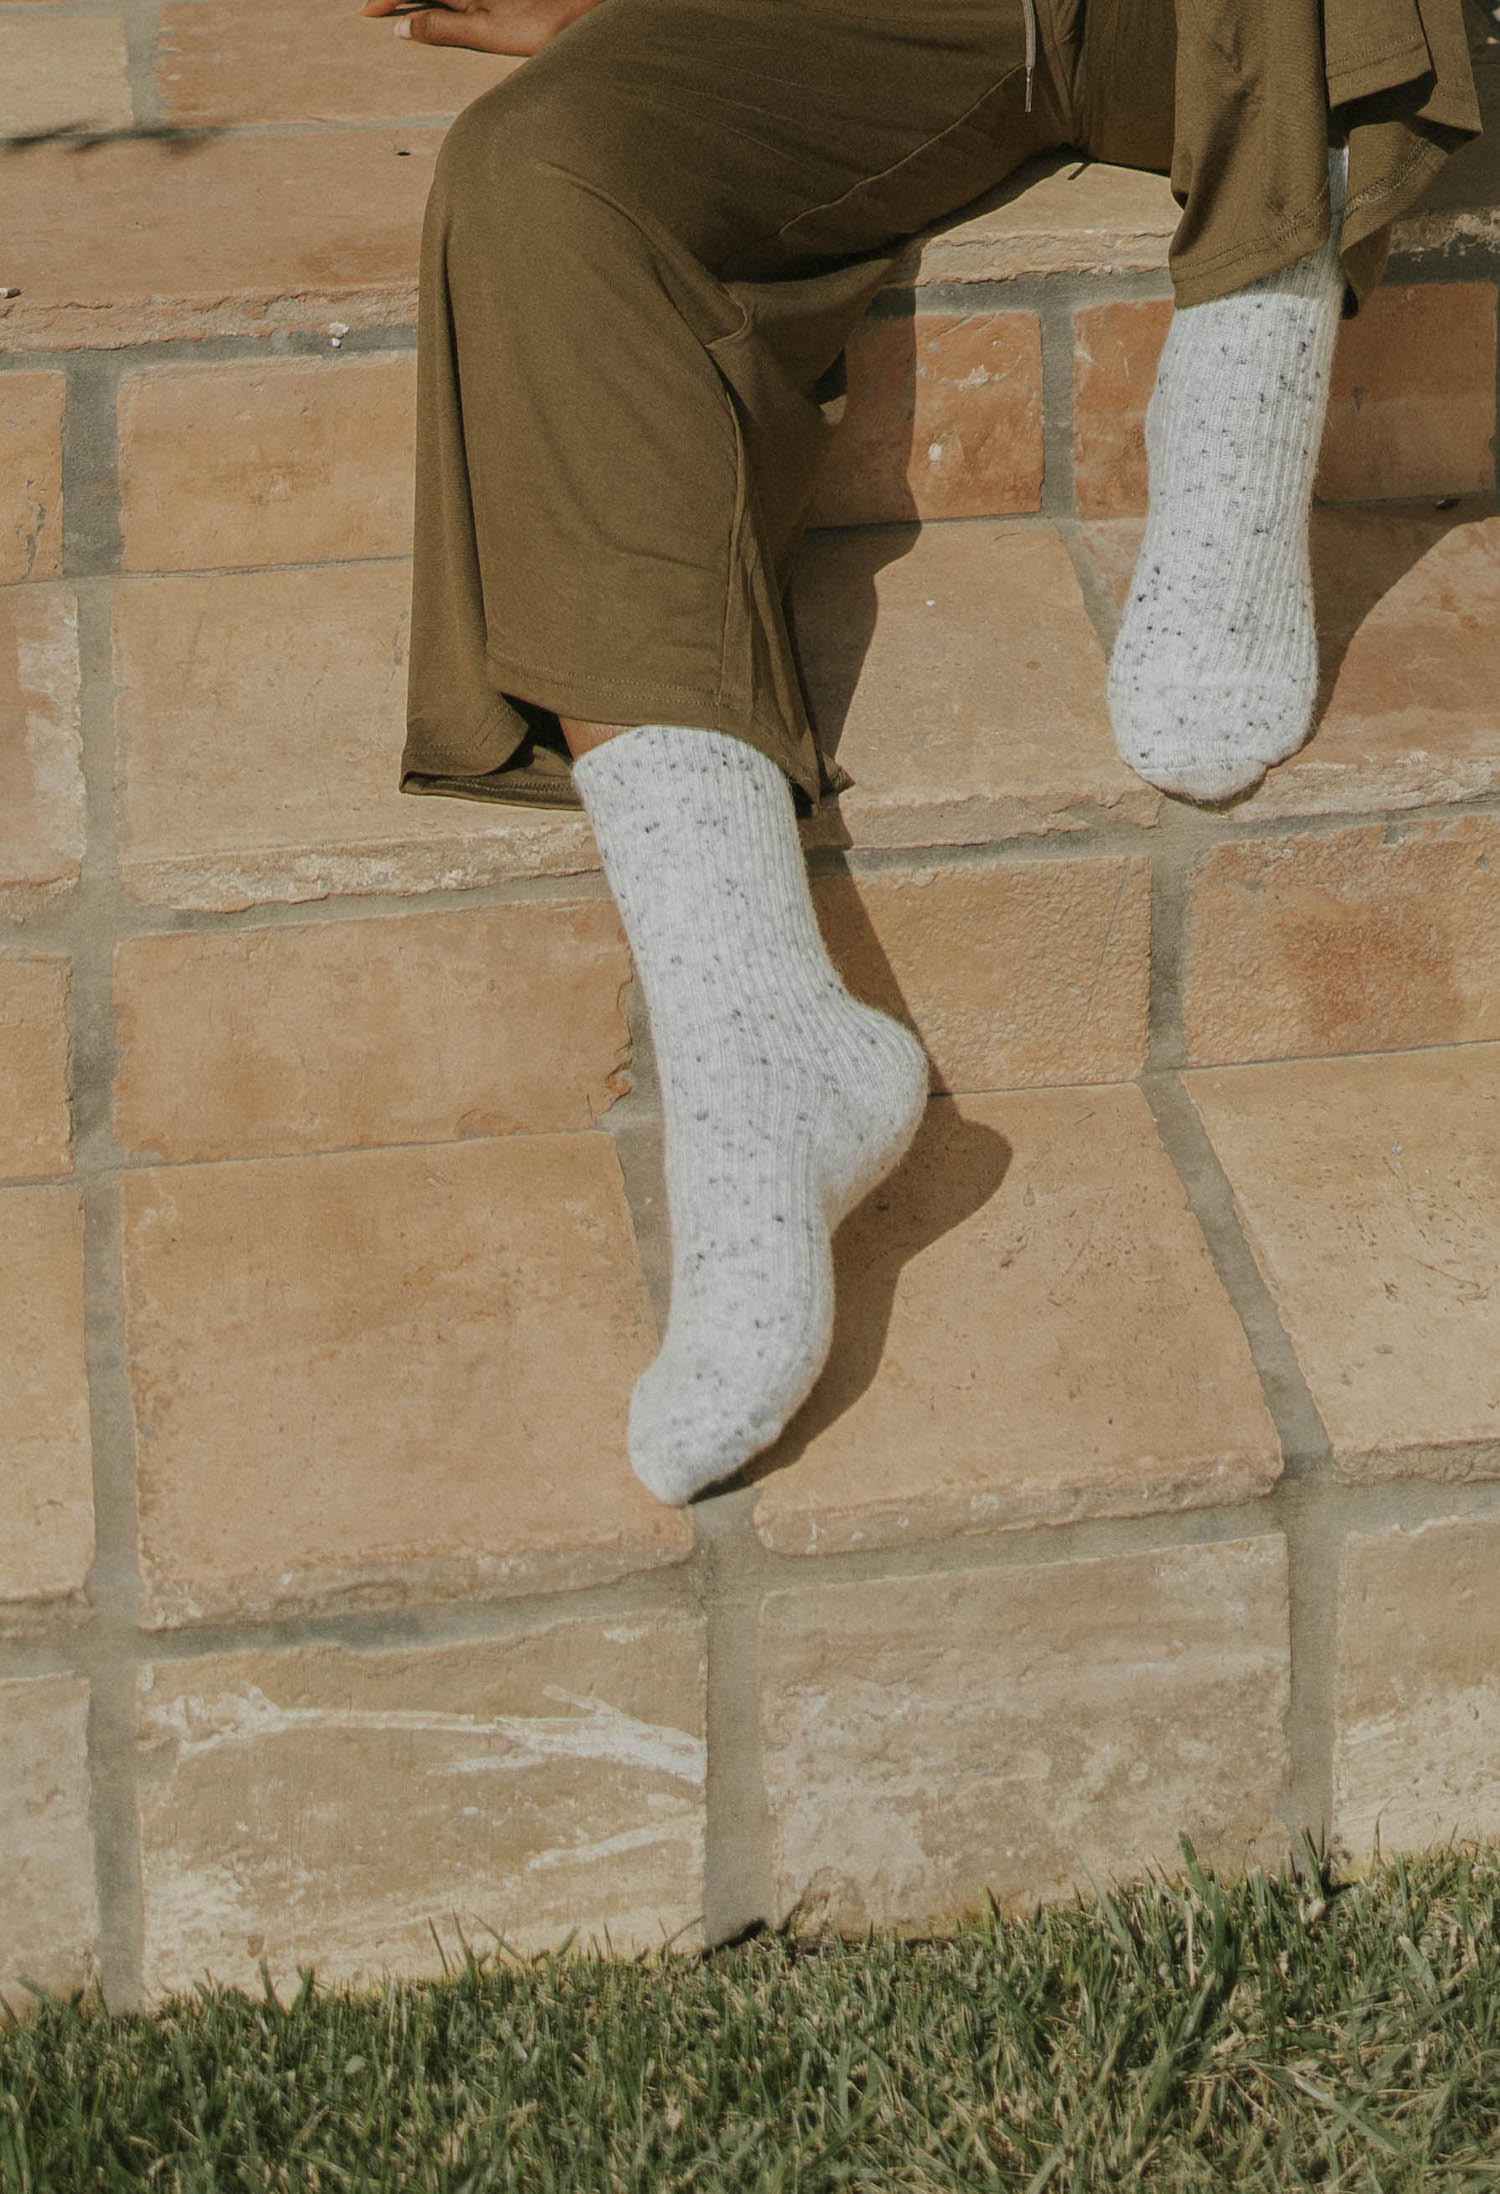 Speckled neutral wool socks with matching sets for women.